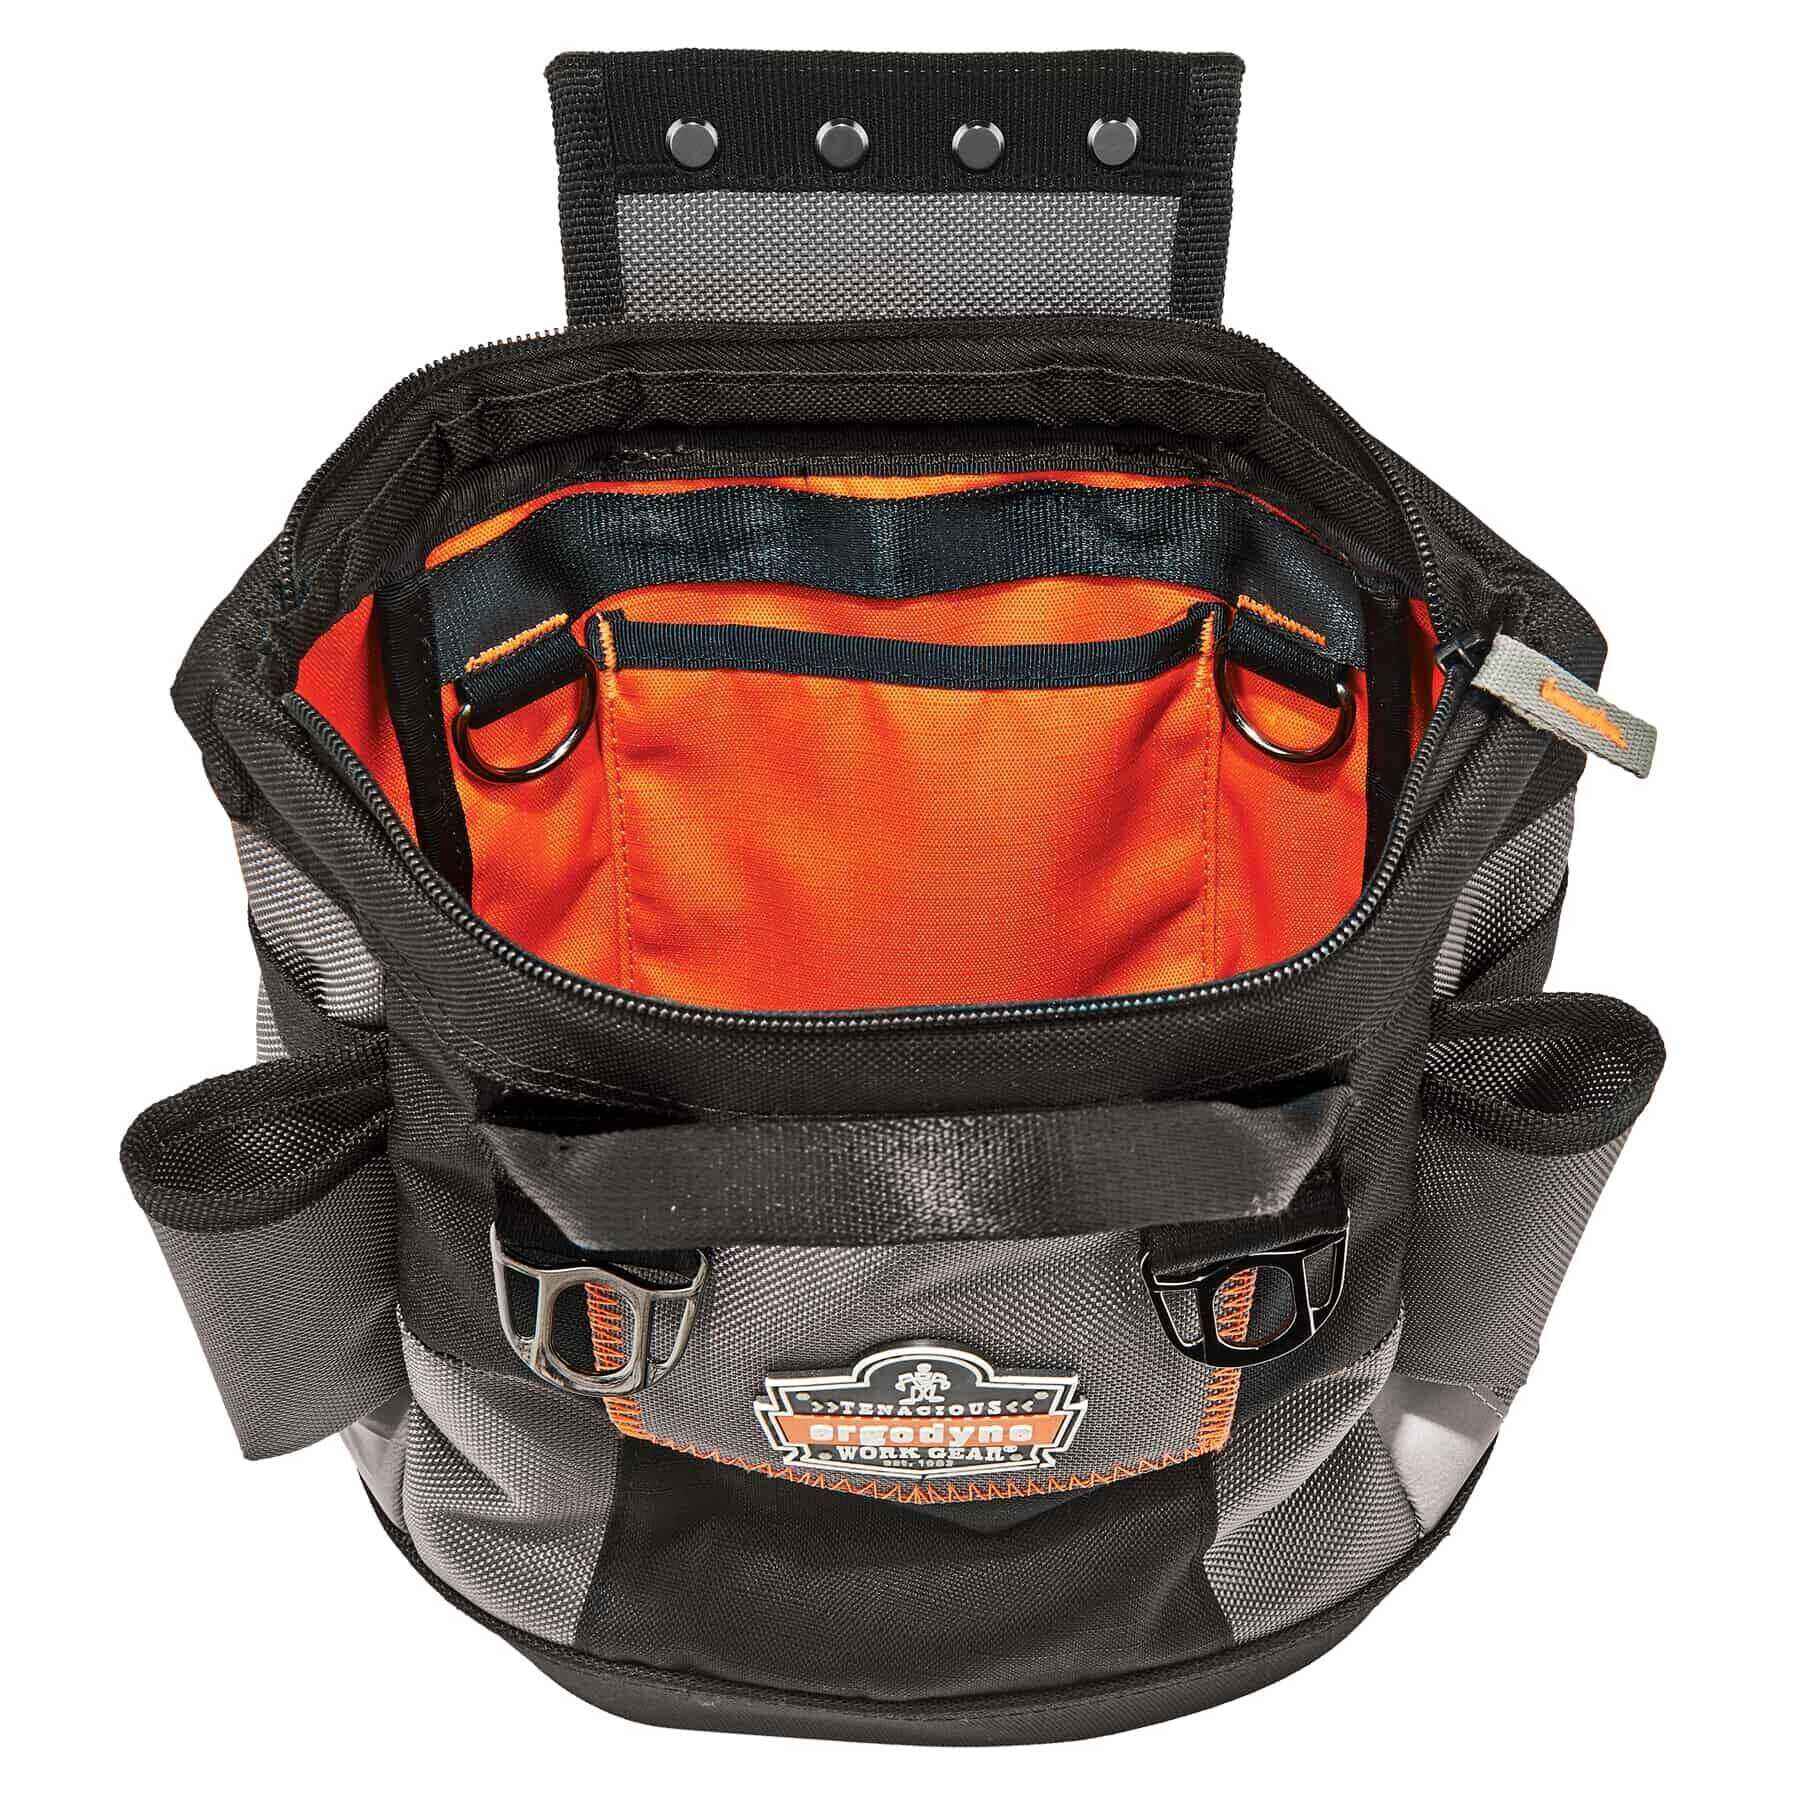 https://www.ergodyne.com/sites/default/files/product-images/13647-5517-topped-tool-pouch-snap-hinge-zipper-closure-detail4.jpg